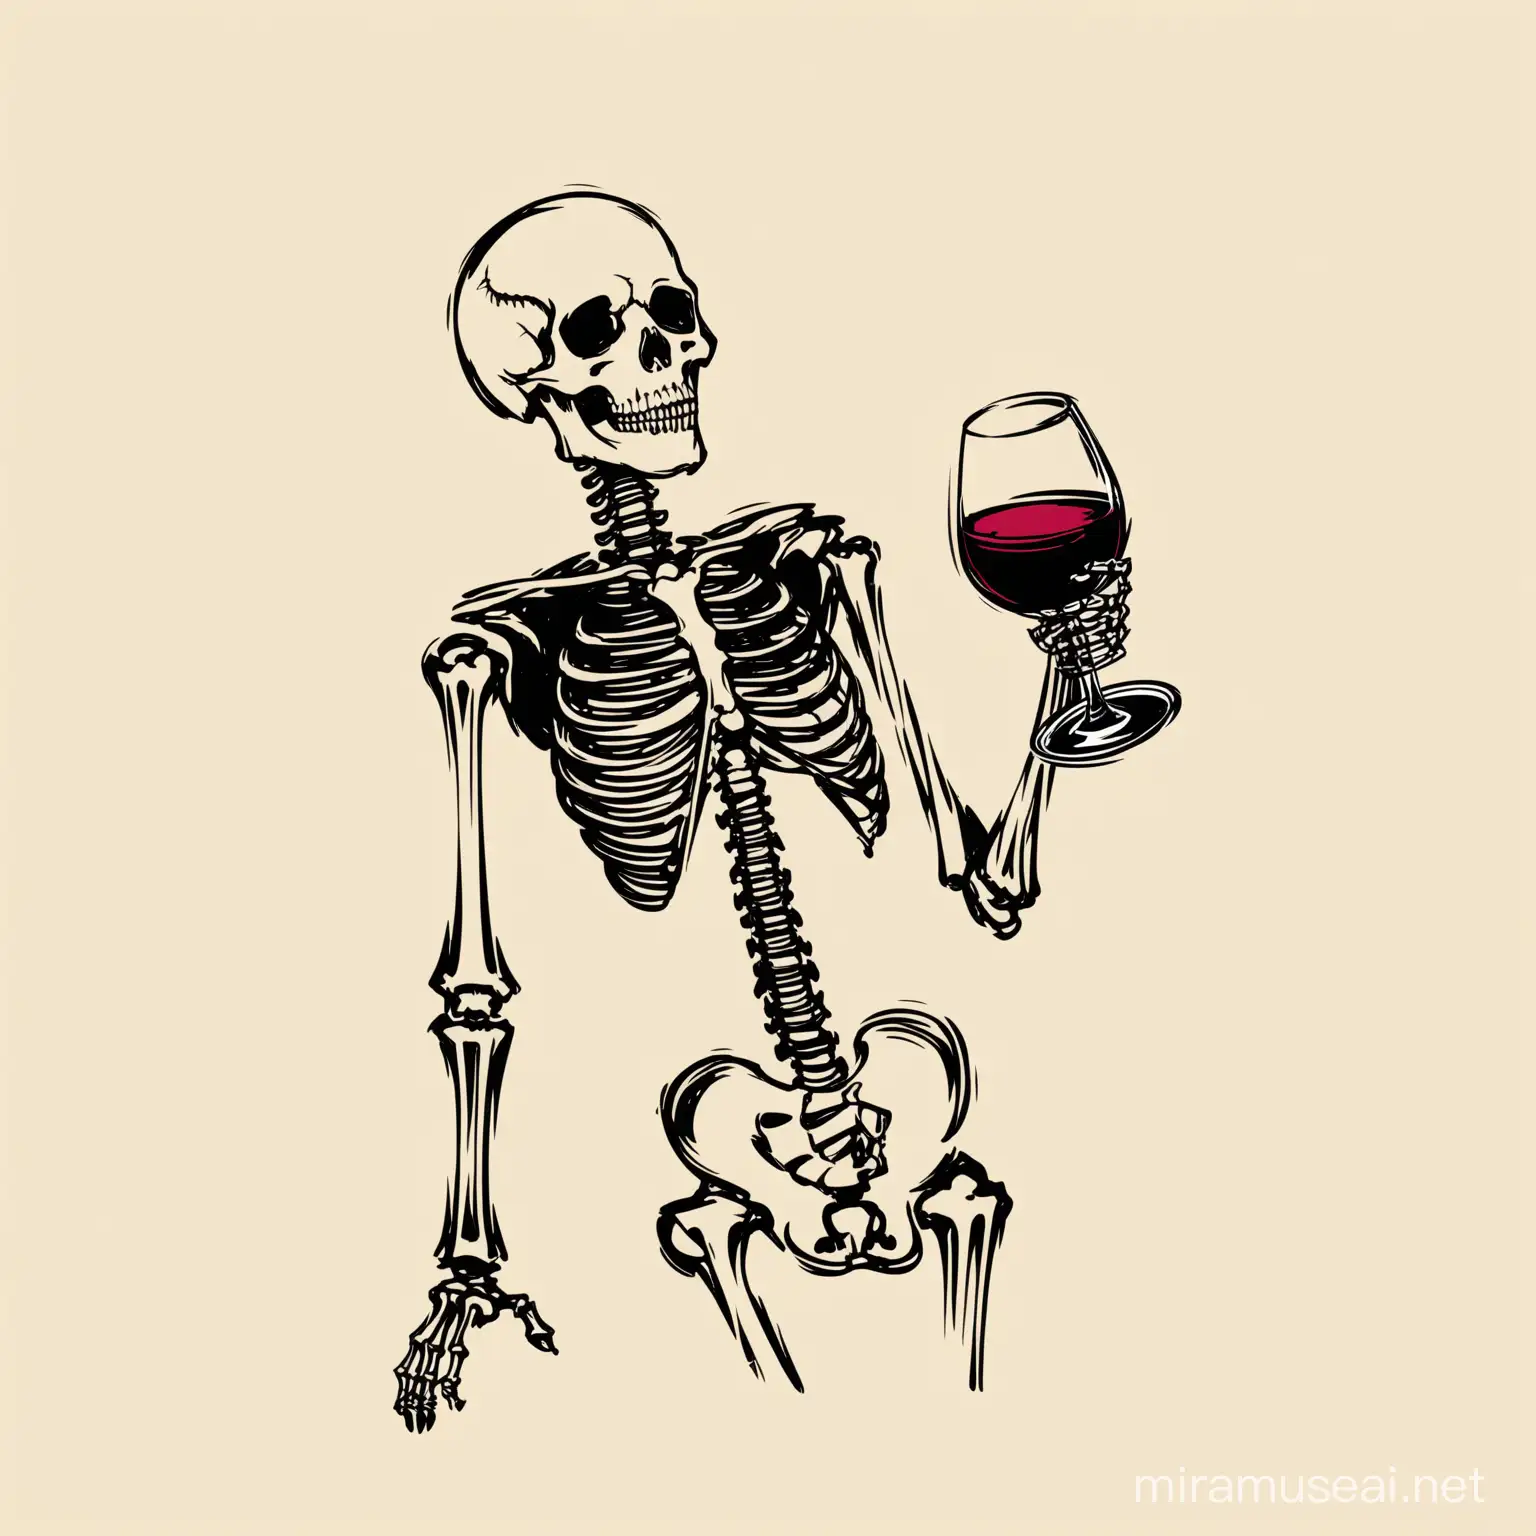 stencils, simple, minimalism, vector art, sketch, flat, 2d, vintage style, human skeleton holding a glass of wine, close-up